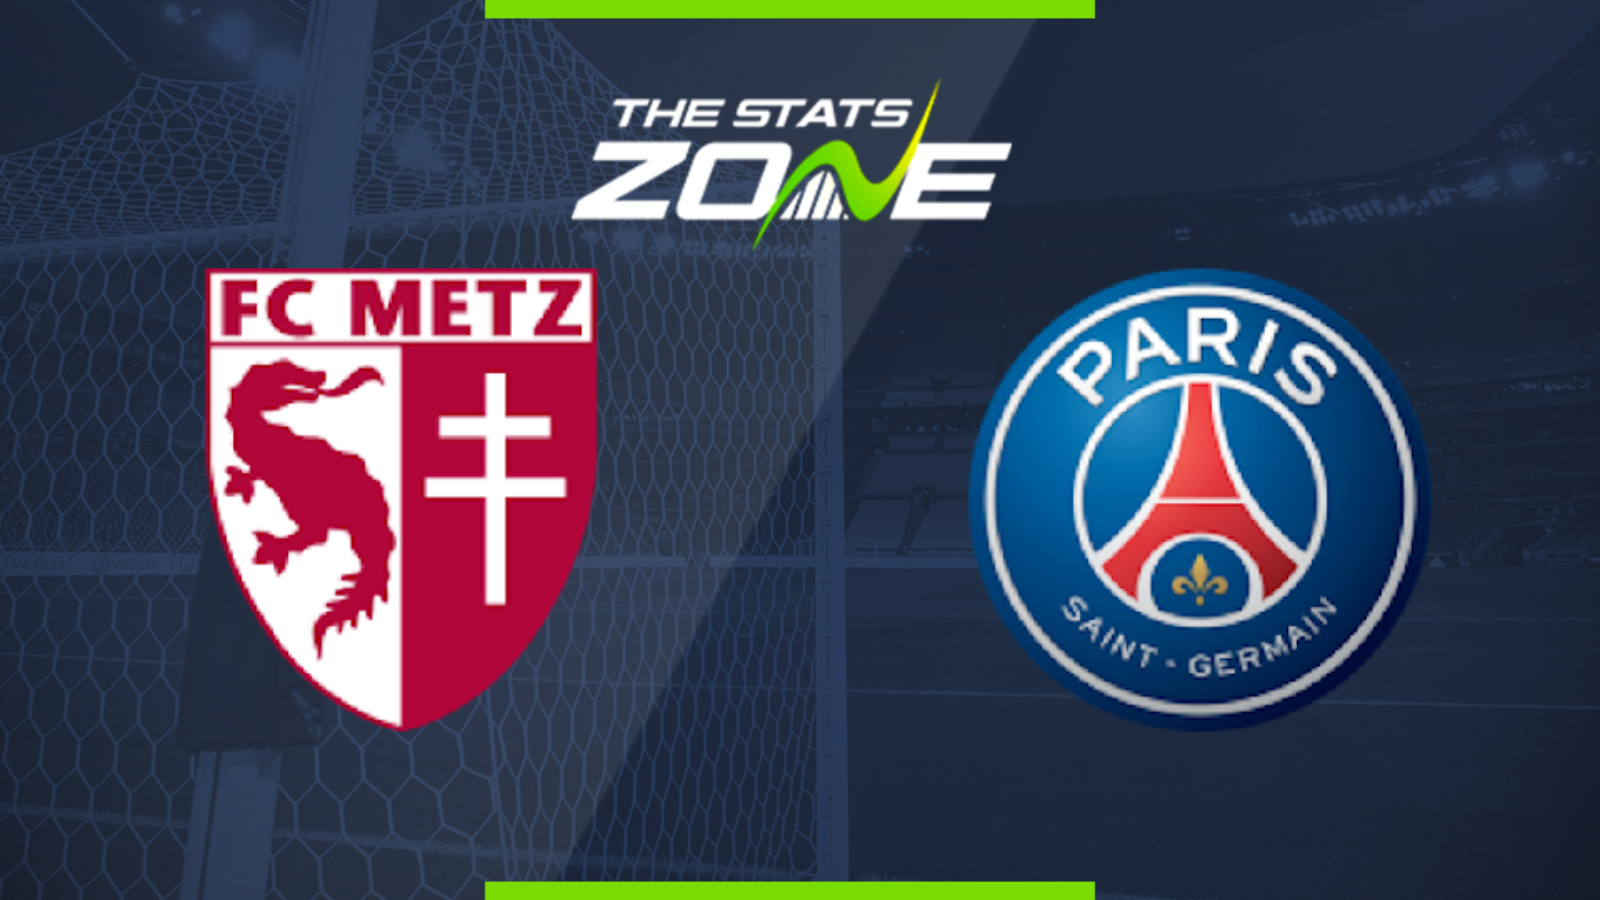 Metz vs psg highlights and full match competition.